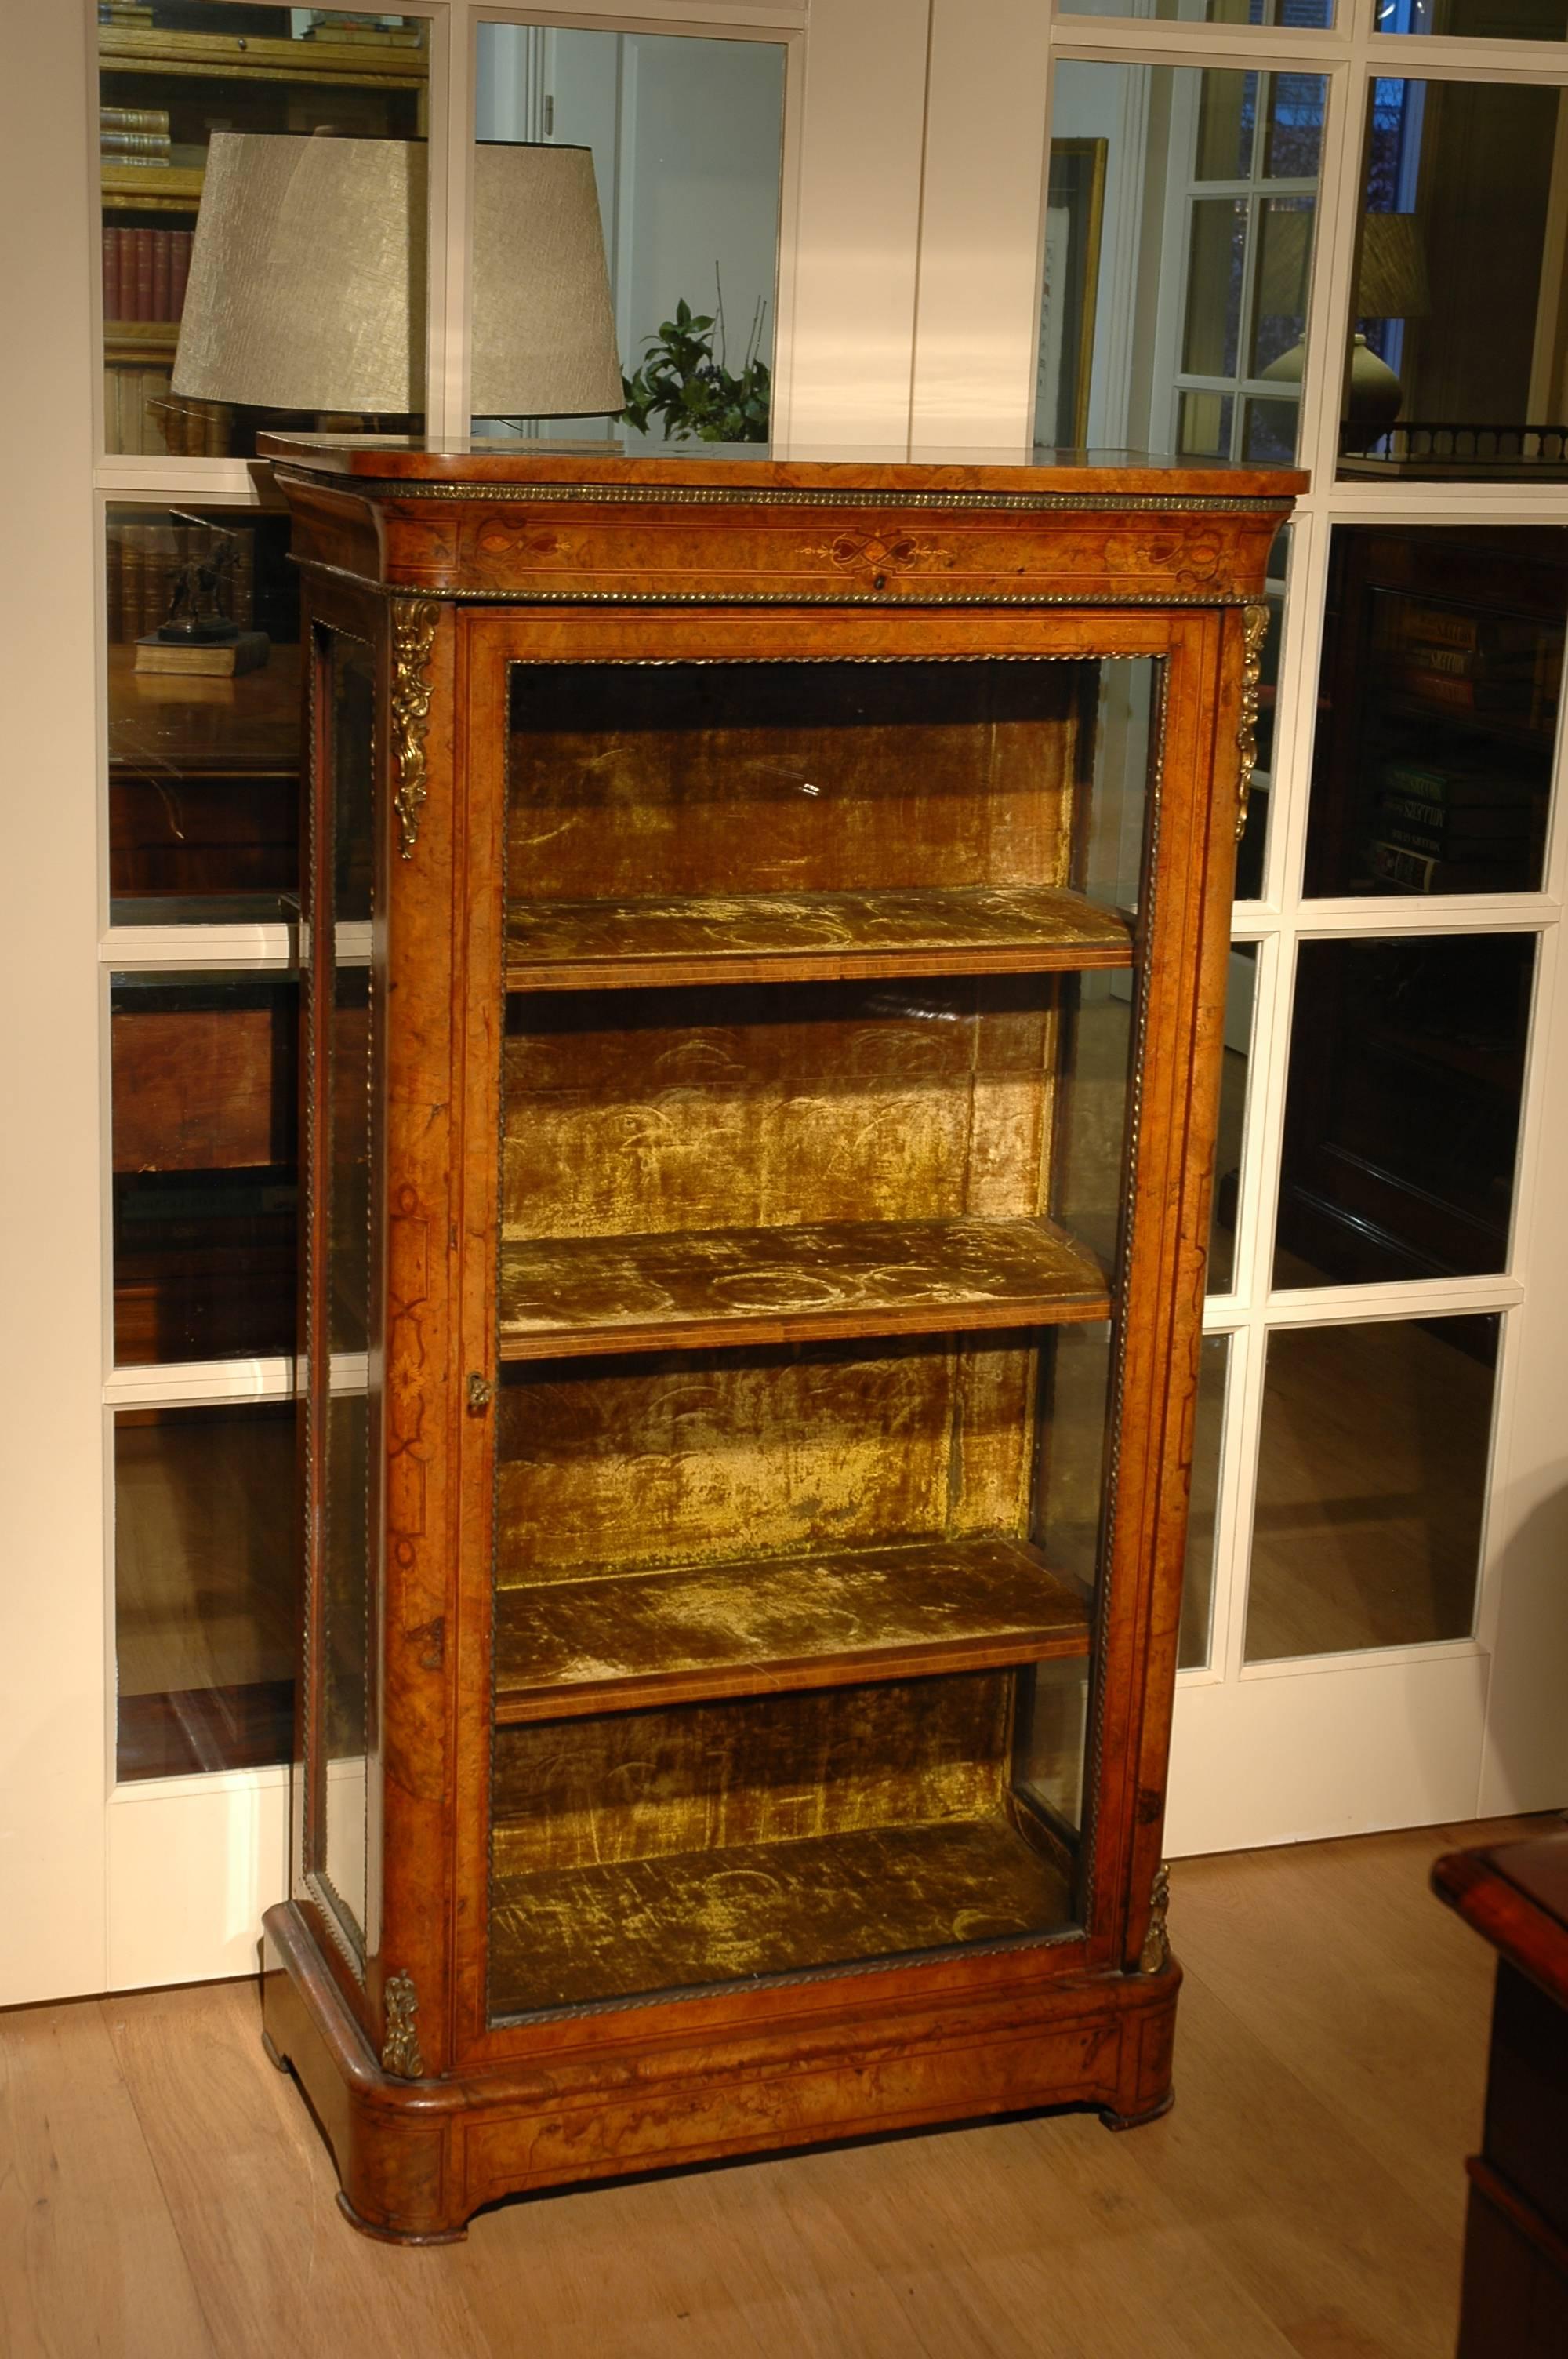 A very high quality burr walnut pier cabinet from the mid-Victorian period. Of fine construction with stunning burr walnut veneers onto a solid mahogany carcas. The cabinet is extensively decorated with crisp ormolu mounts of the highest quality.